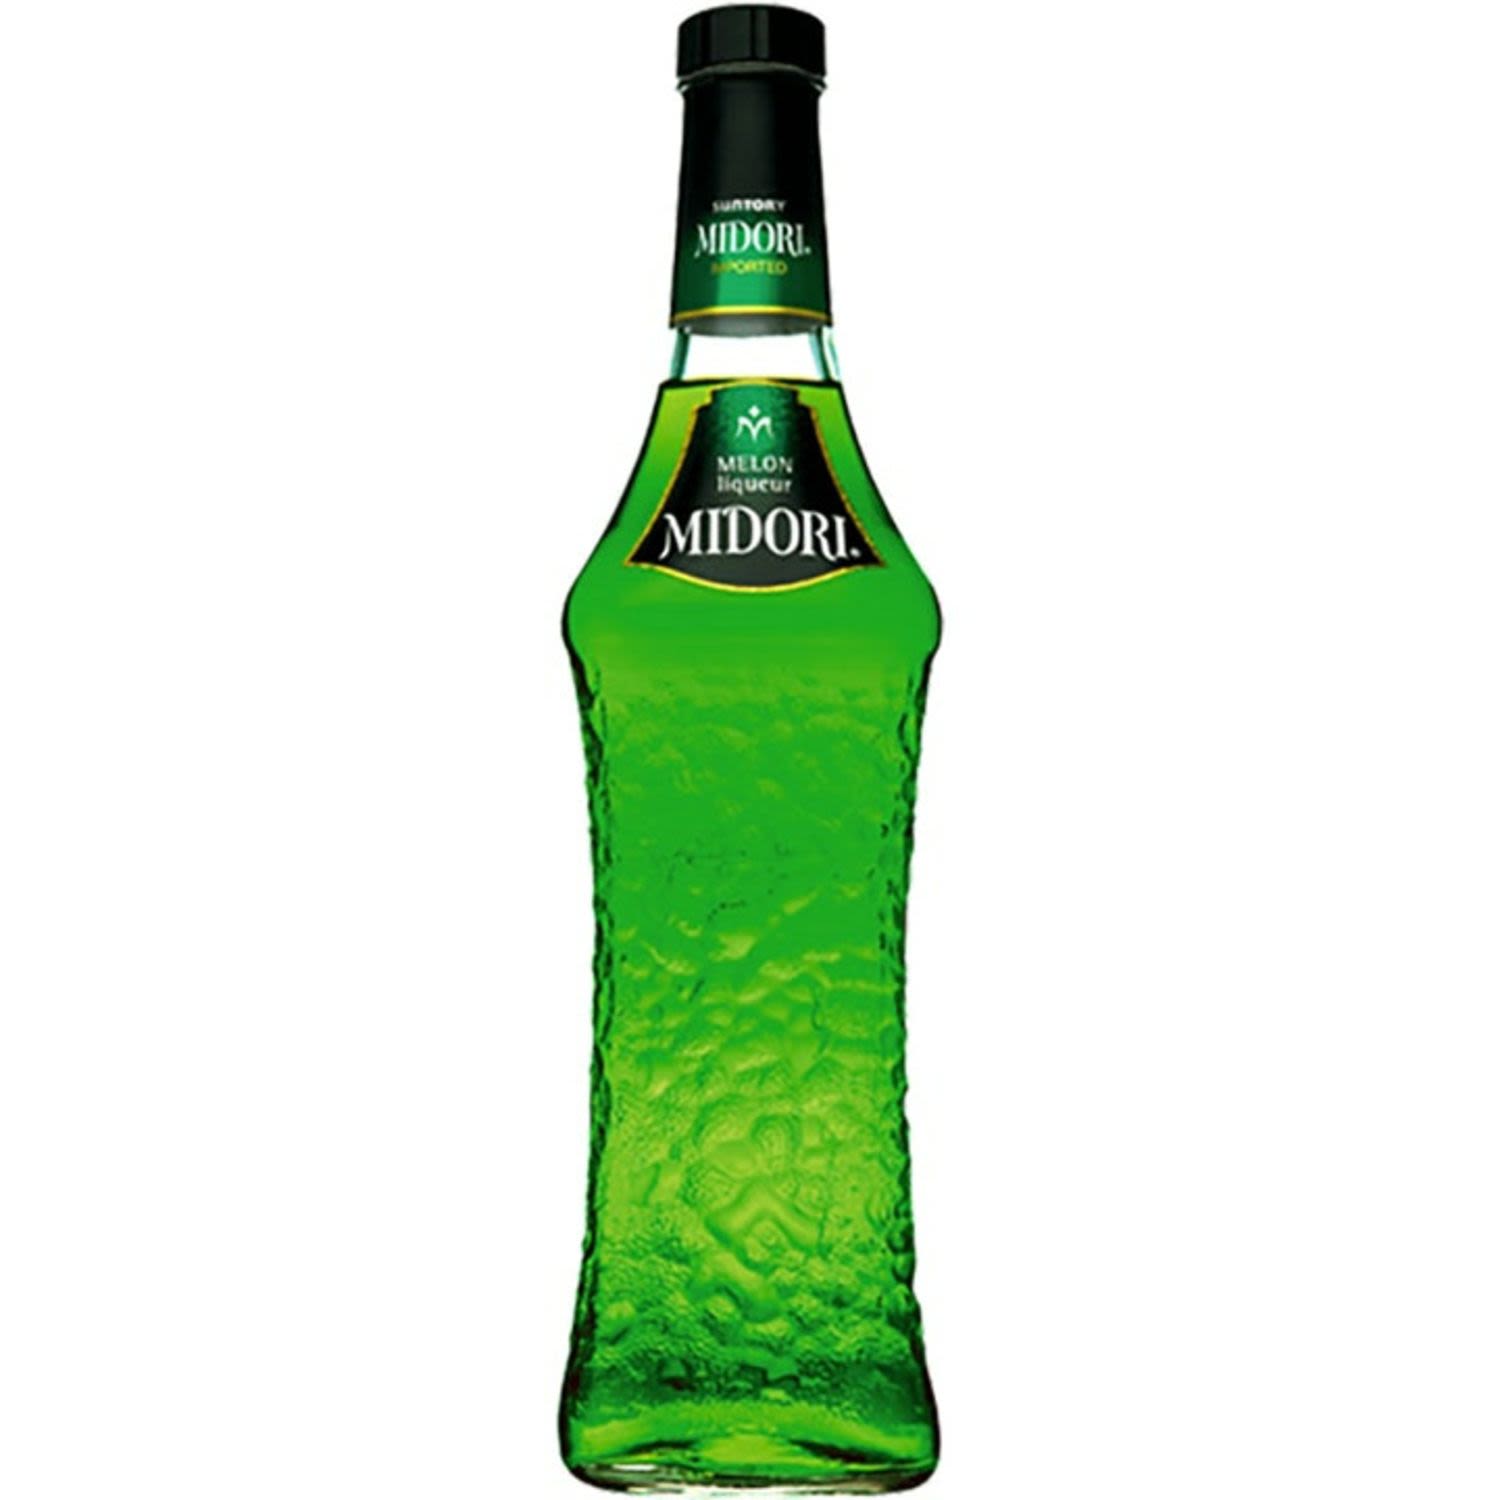 MIDORI liqueur is made with premium Yubari and musk melons. The exotic melon taste makes it a refreshing and versatile mixer.<br /> <br />Alcohol Volume: 20.00%<br /><br />Pack Format: Bottle<br /><br />Standard Drinks: 7.9</br /><br />Pack Type: Bottle<br /><br />Country of Origin: Japan<br />